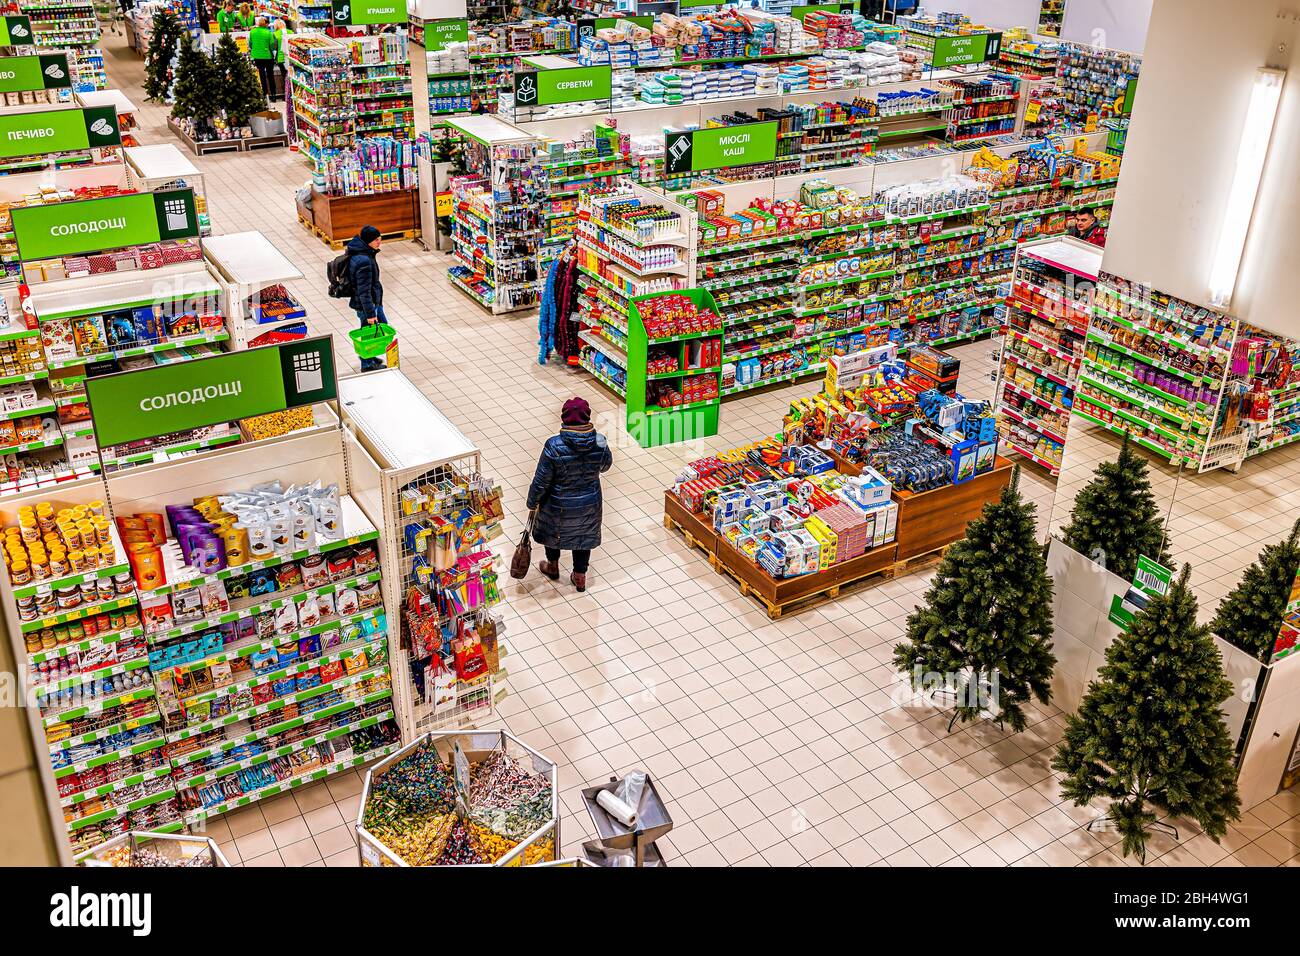 Rivne, Ukraine - December 28, 2019: High angle above view of inside grocery store interior called Novus in eastern europe country with Ukrainian goods Stock Photo